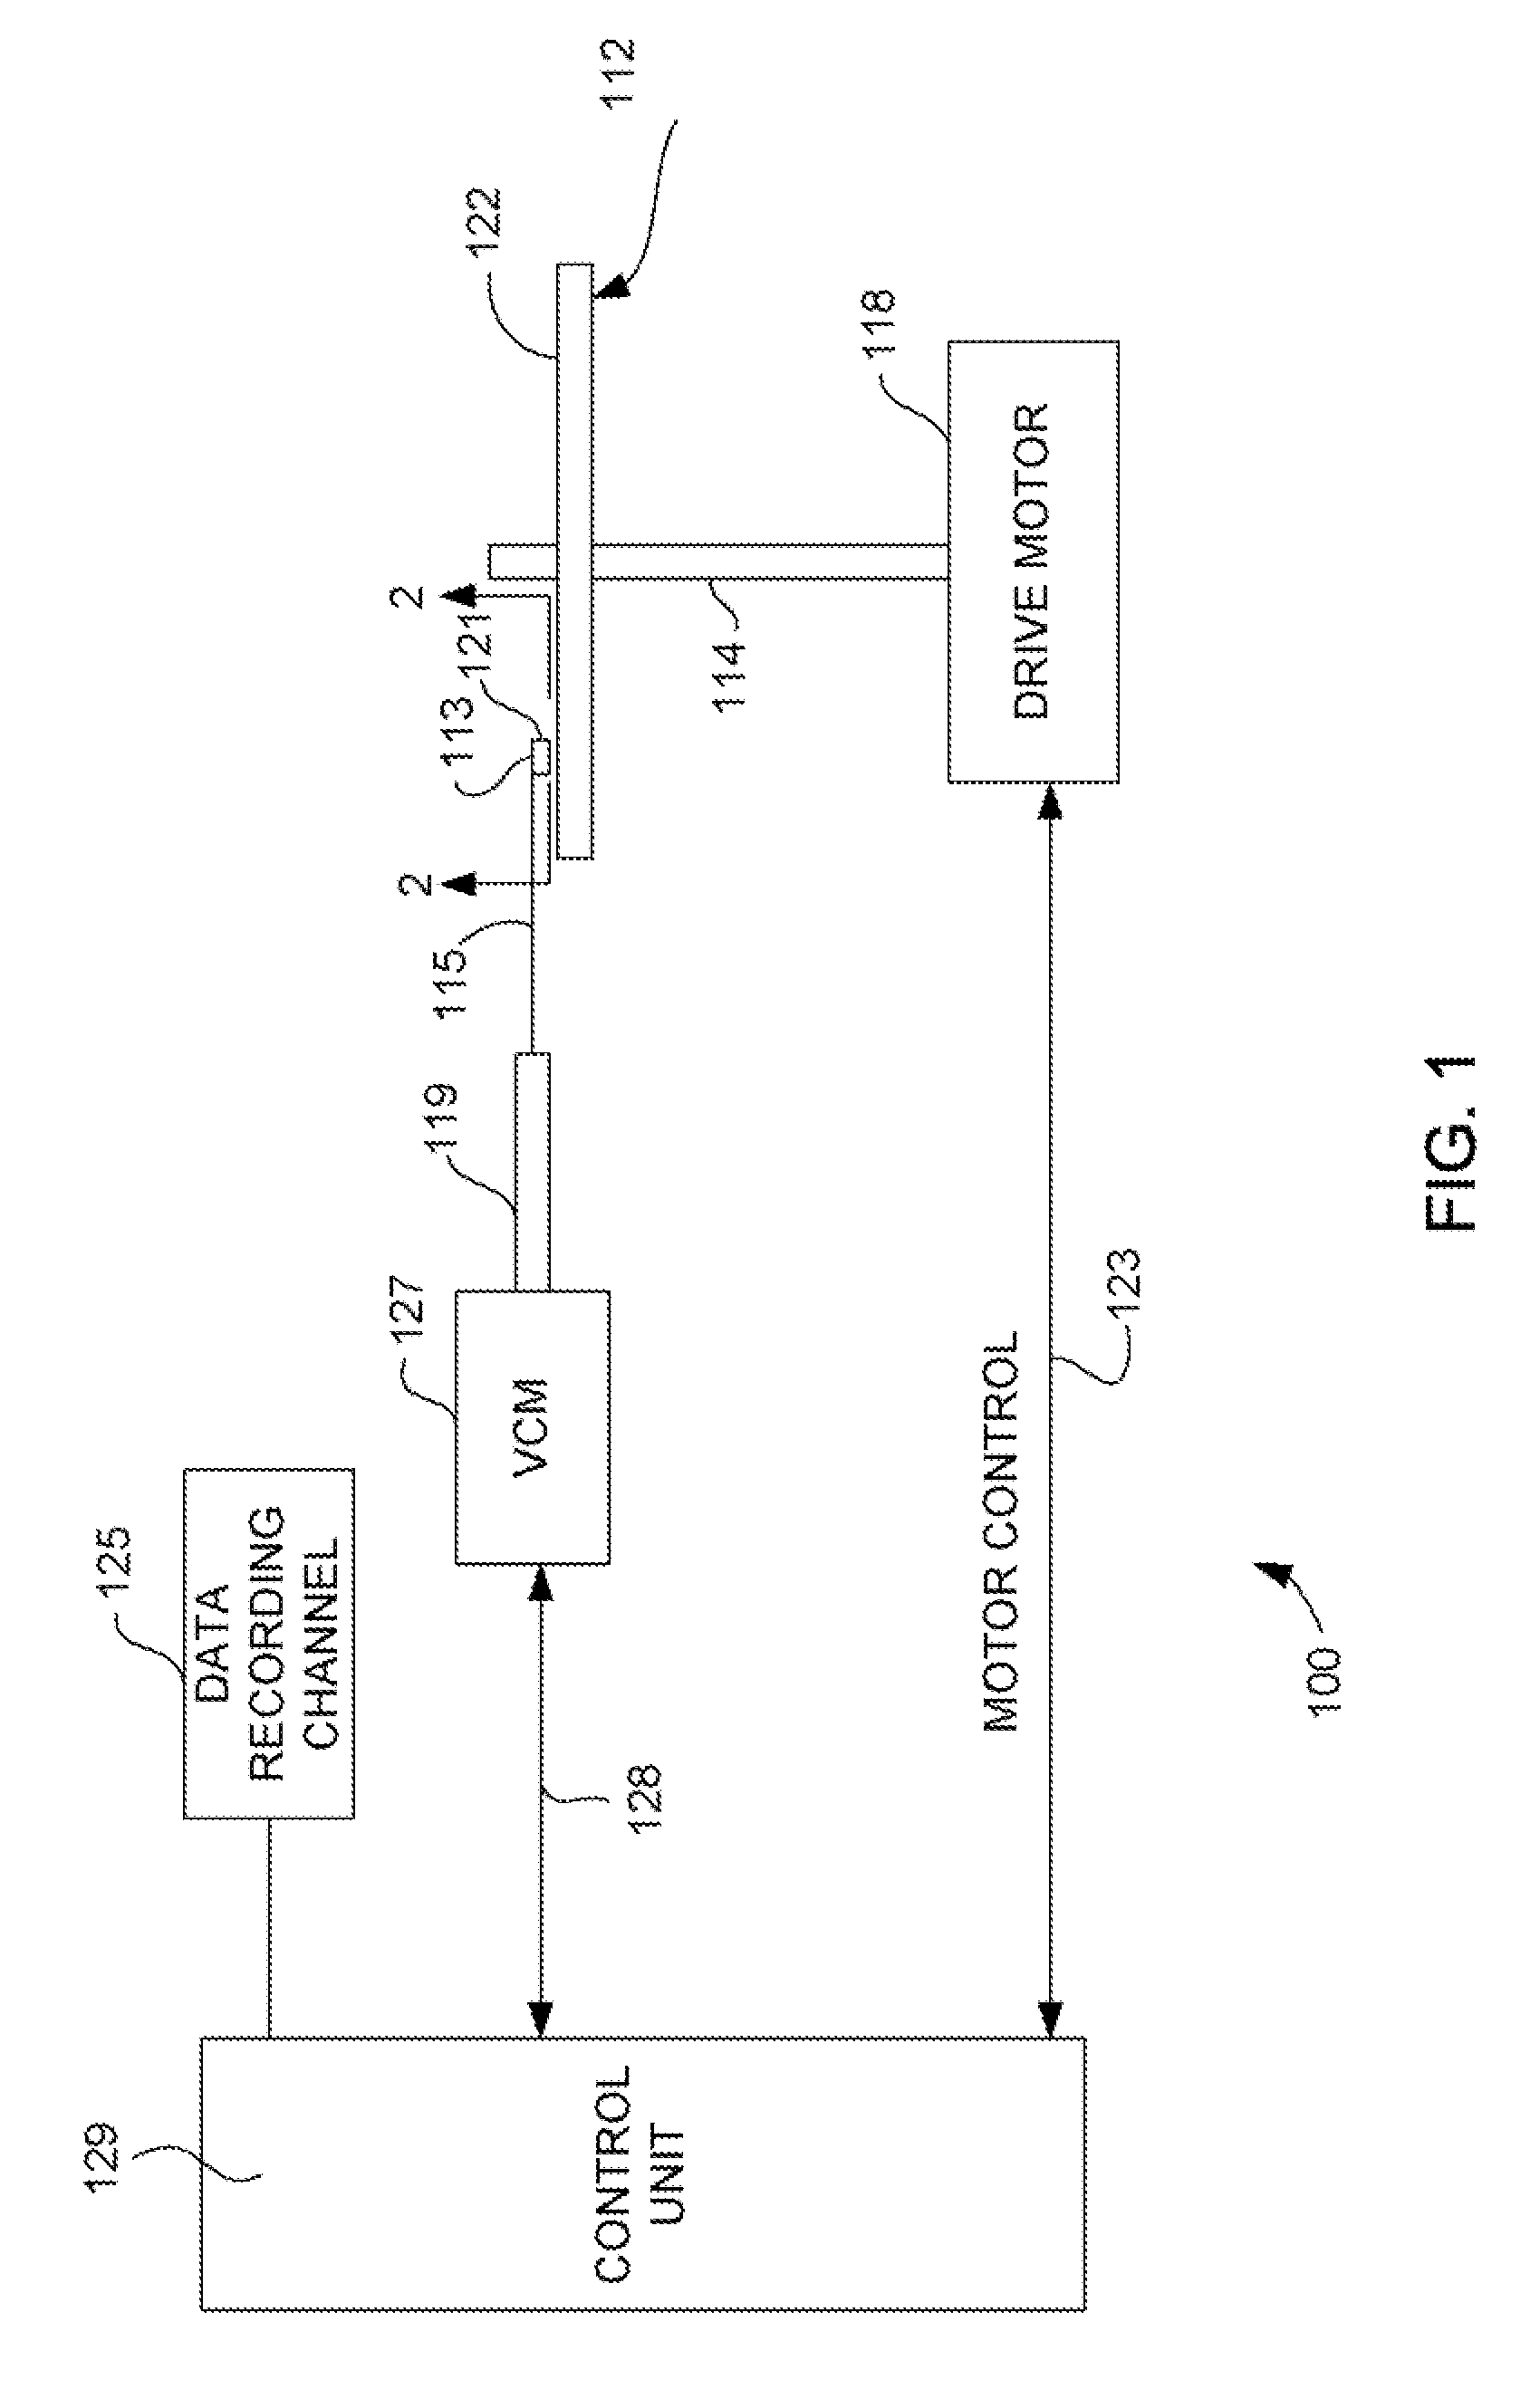 Electrical lapping guide for flare point control and trailing shield throat height in a perpendicular magnetic write head